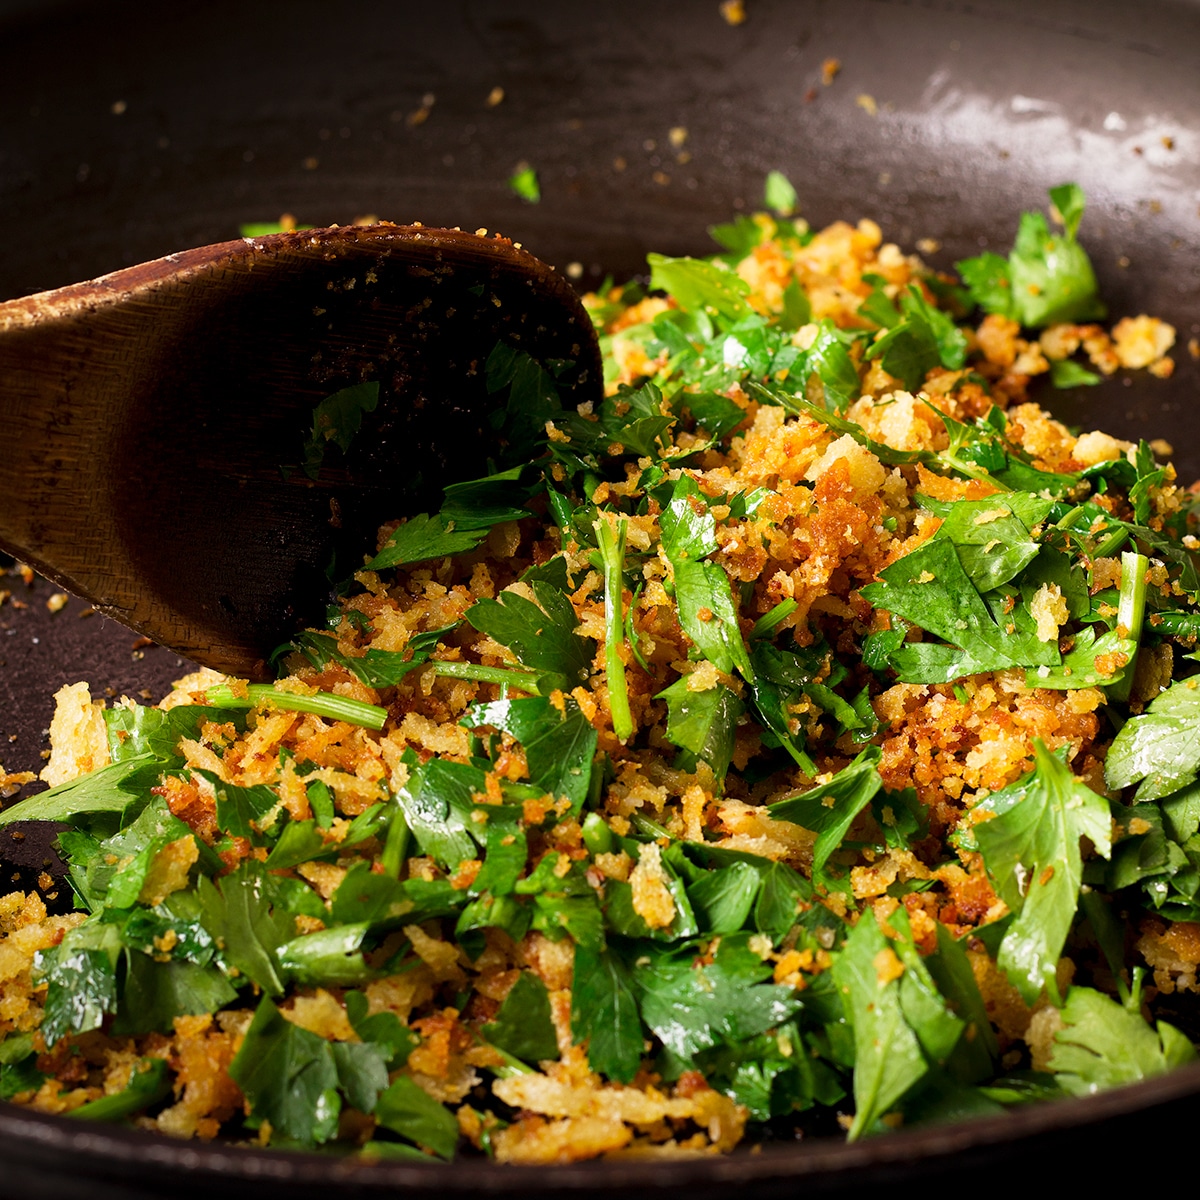 Using a wooden spoon to stir chopped fresh parsley into a skillet with toasted bread crumbs.